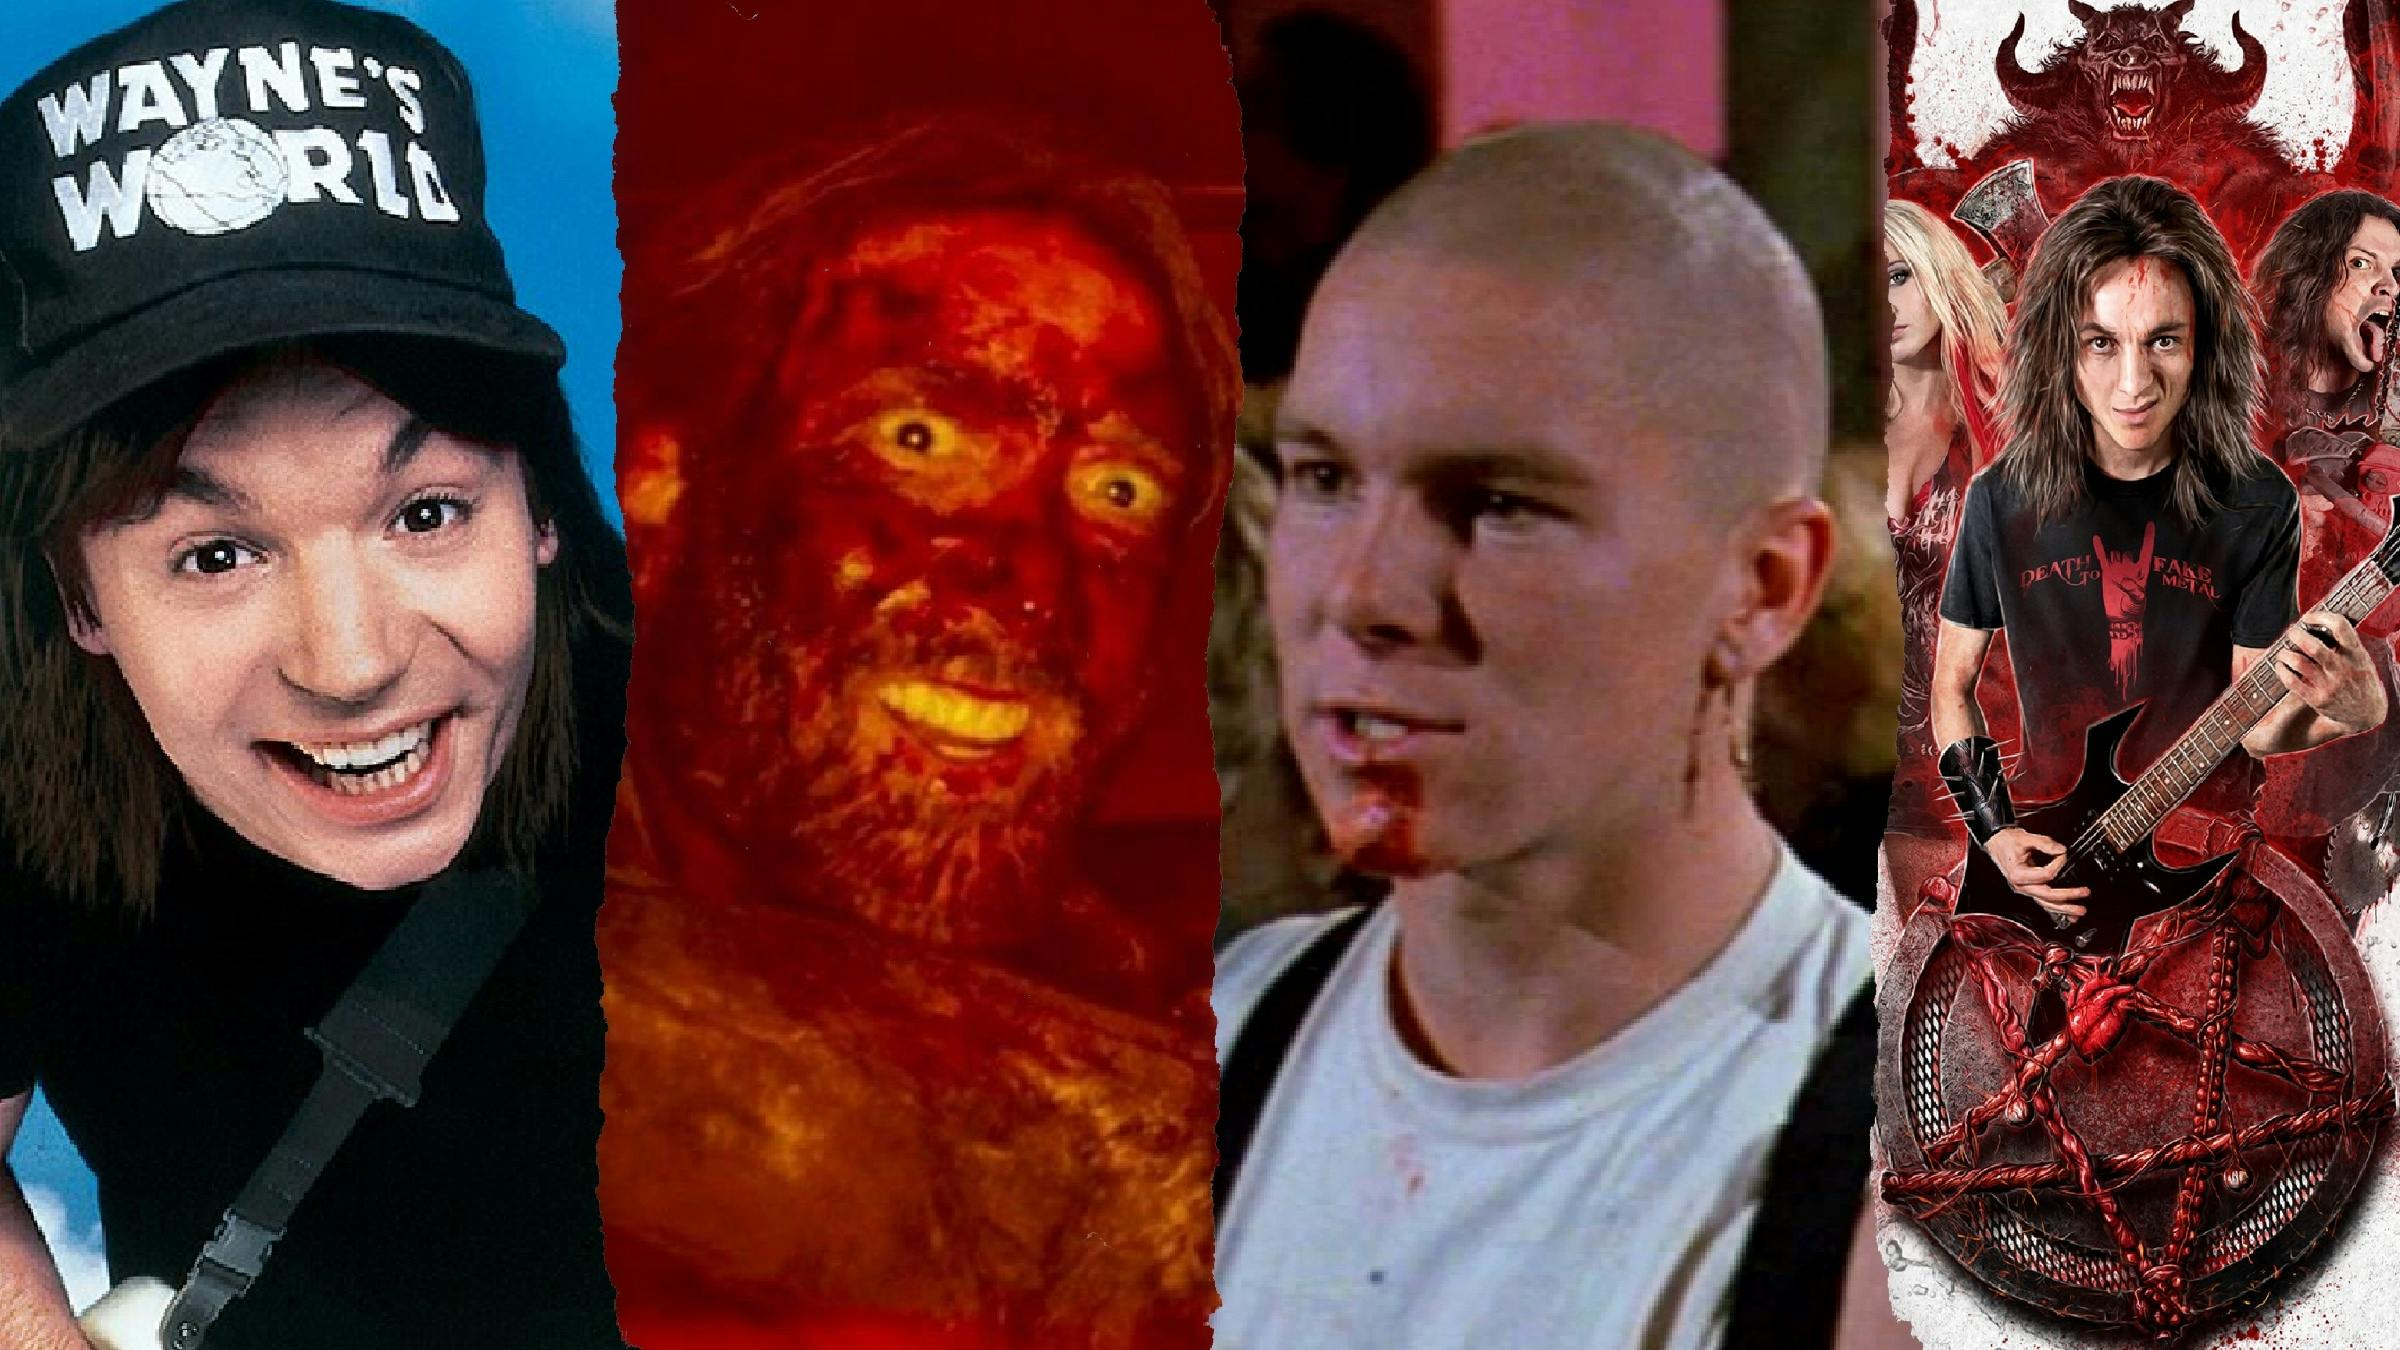 15 Of The Best Rock And Metal Movies You Can Stream Right Now